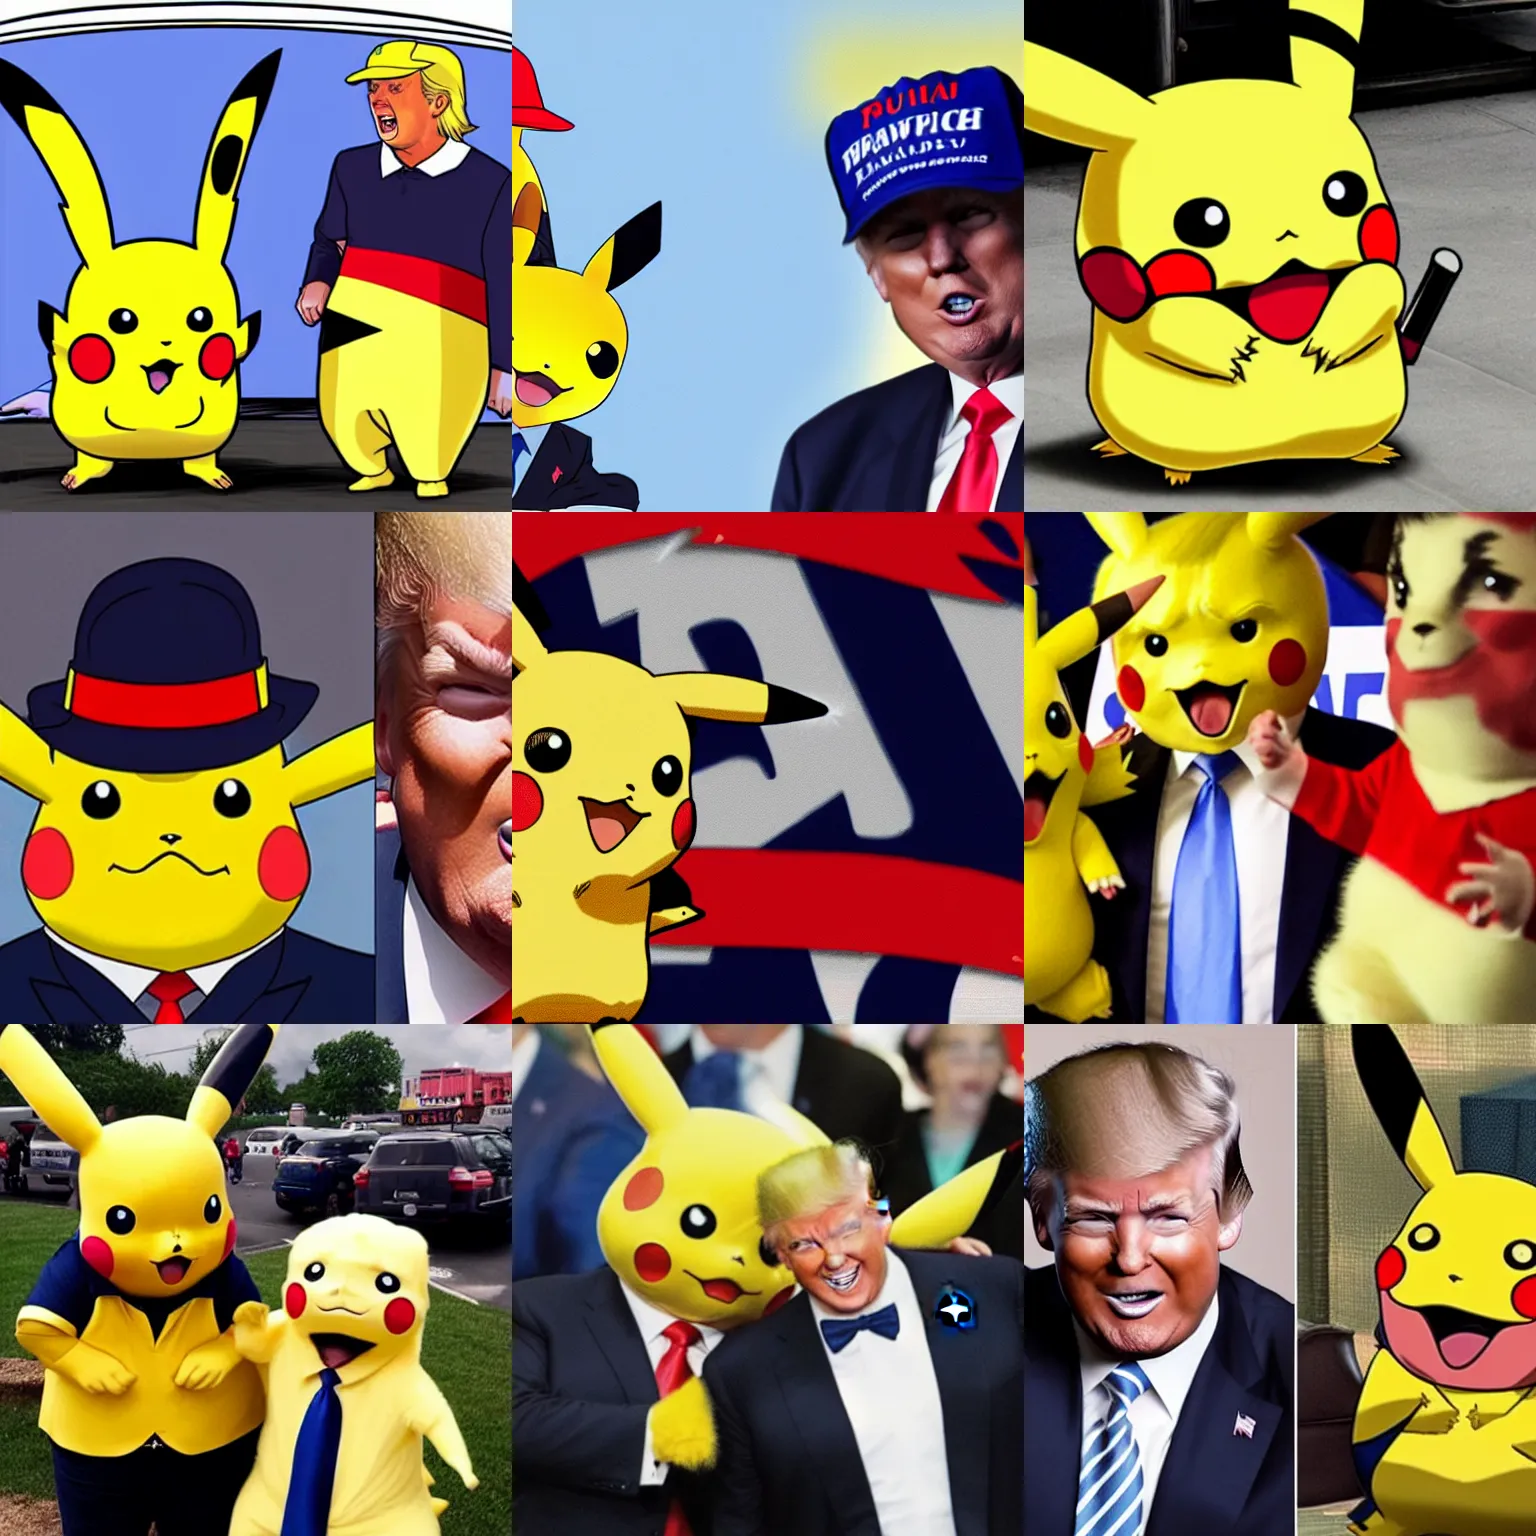 Prompt: pikachu and donald trump merging into one